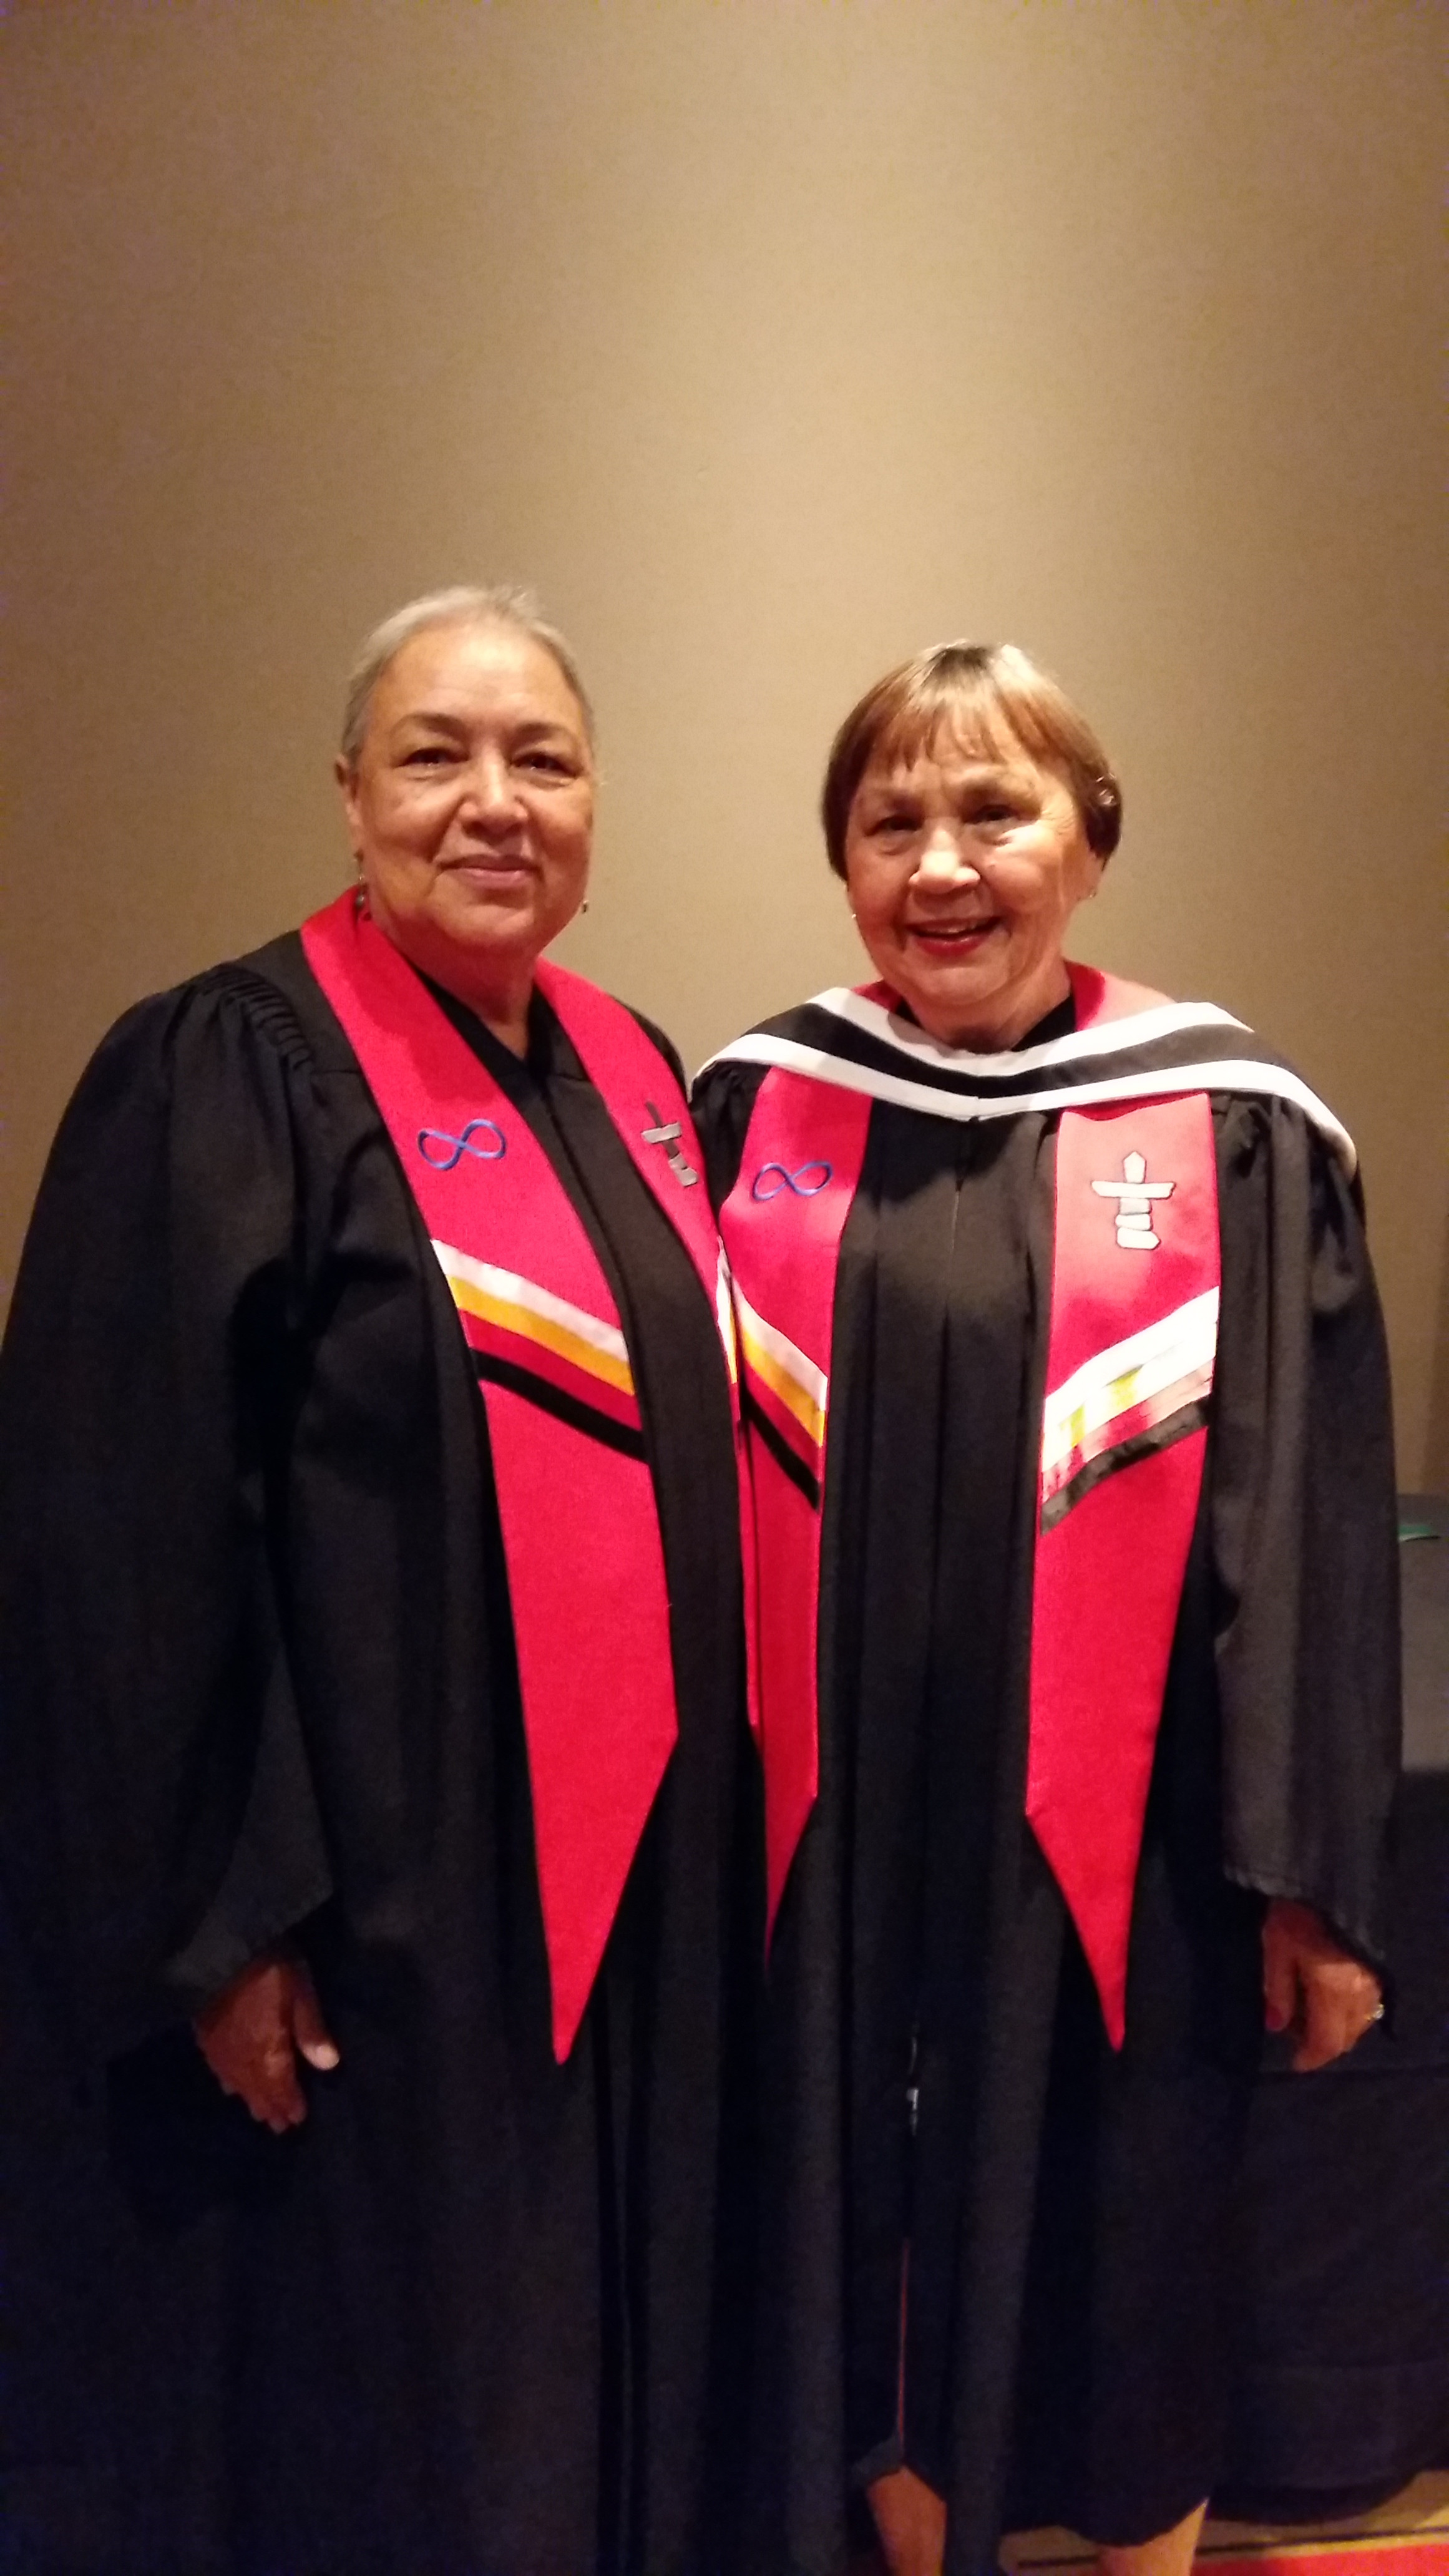 Audrey-Claire Laurence and colleague at Algonquin College Convocation